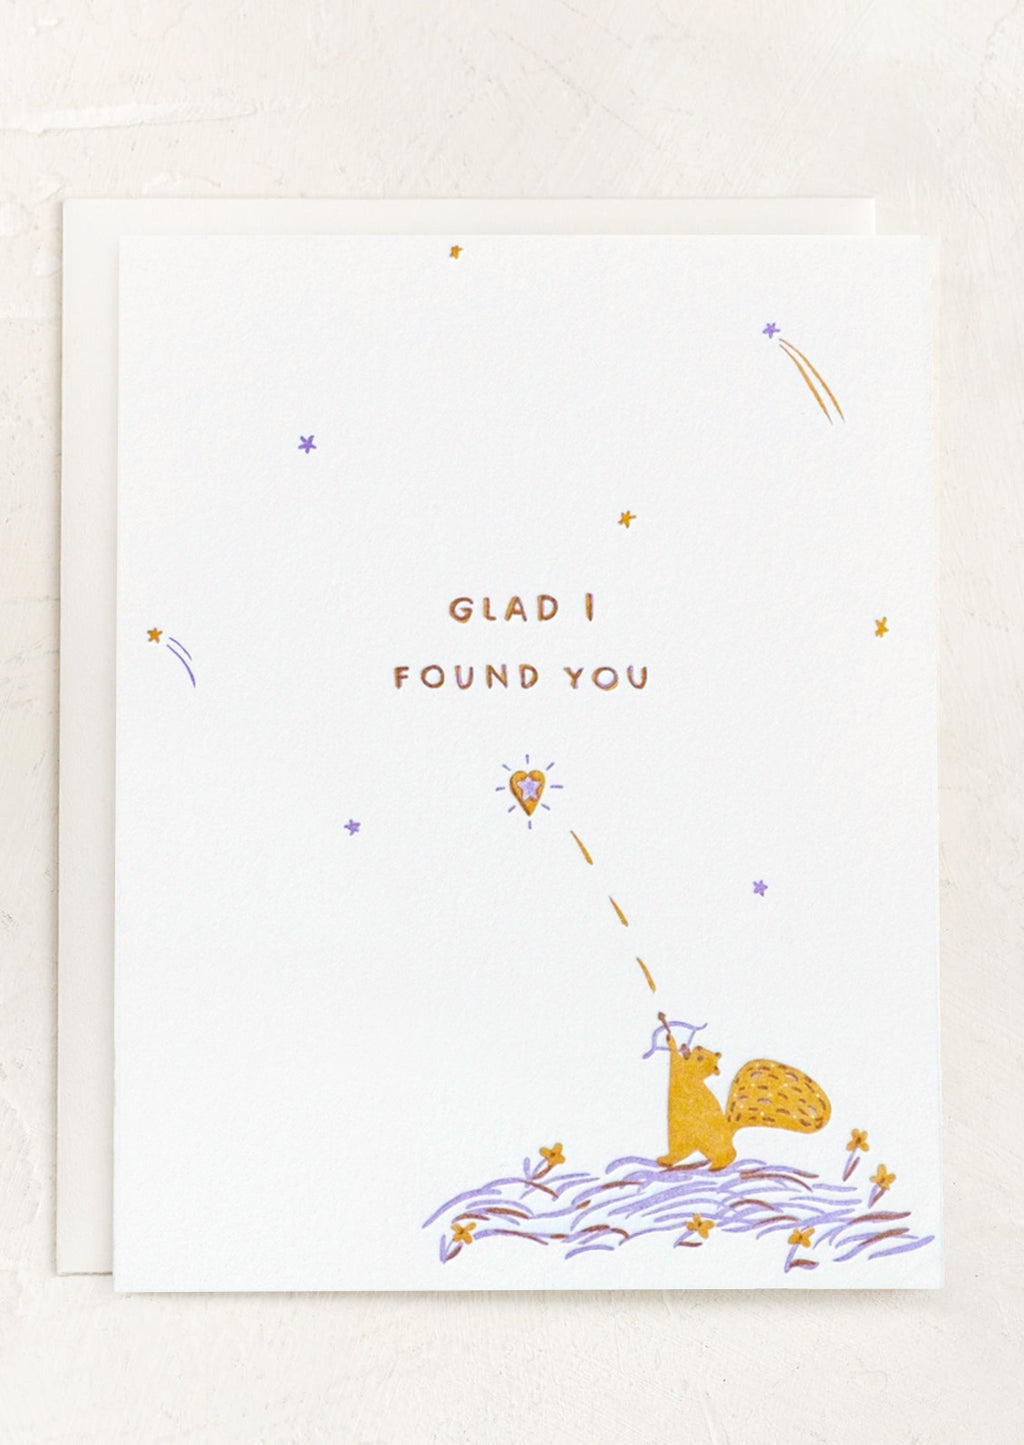 1: A card with illustration of squirrel shooting a heart arrow, text reads "Glad I found you".